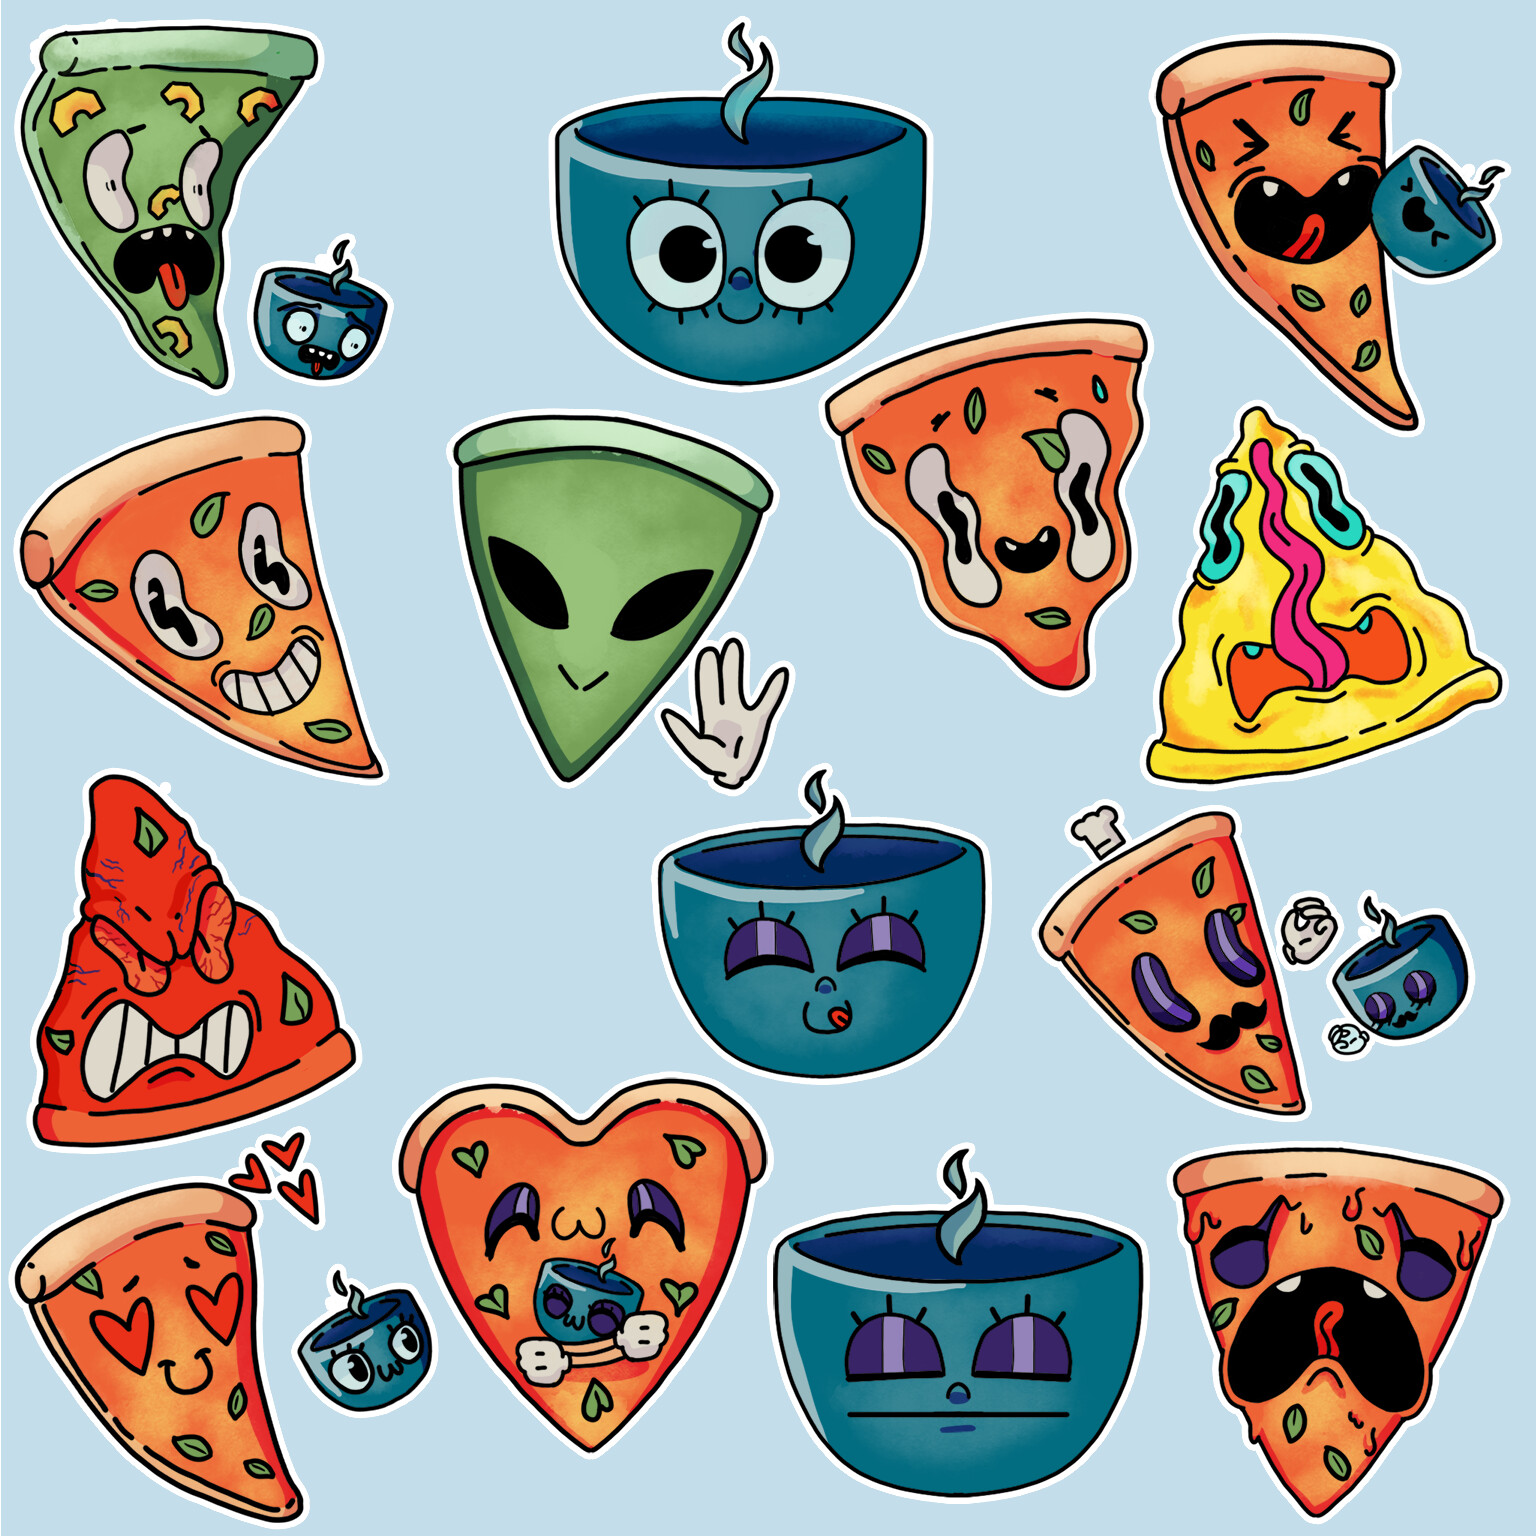 Pizza with Coffee – Telegram sticker pack